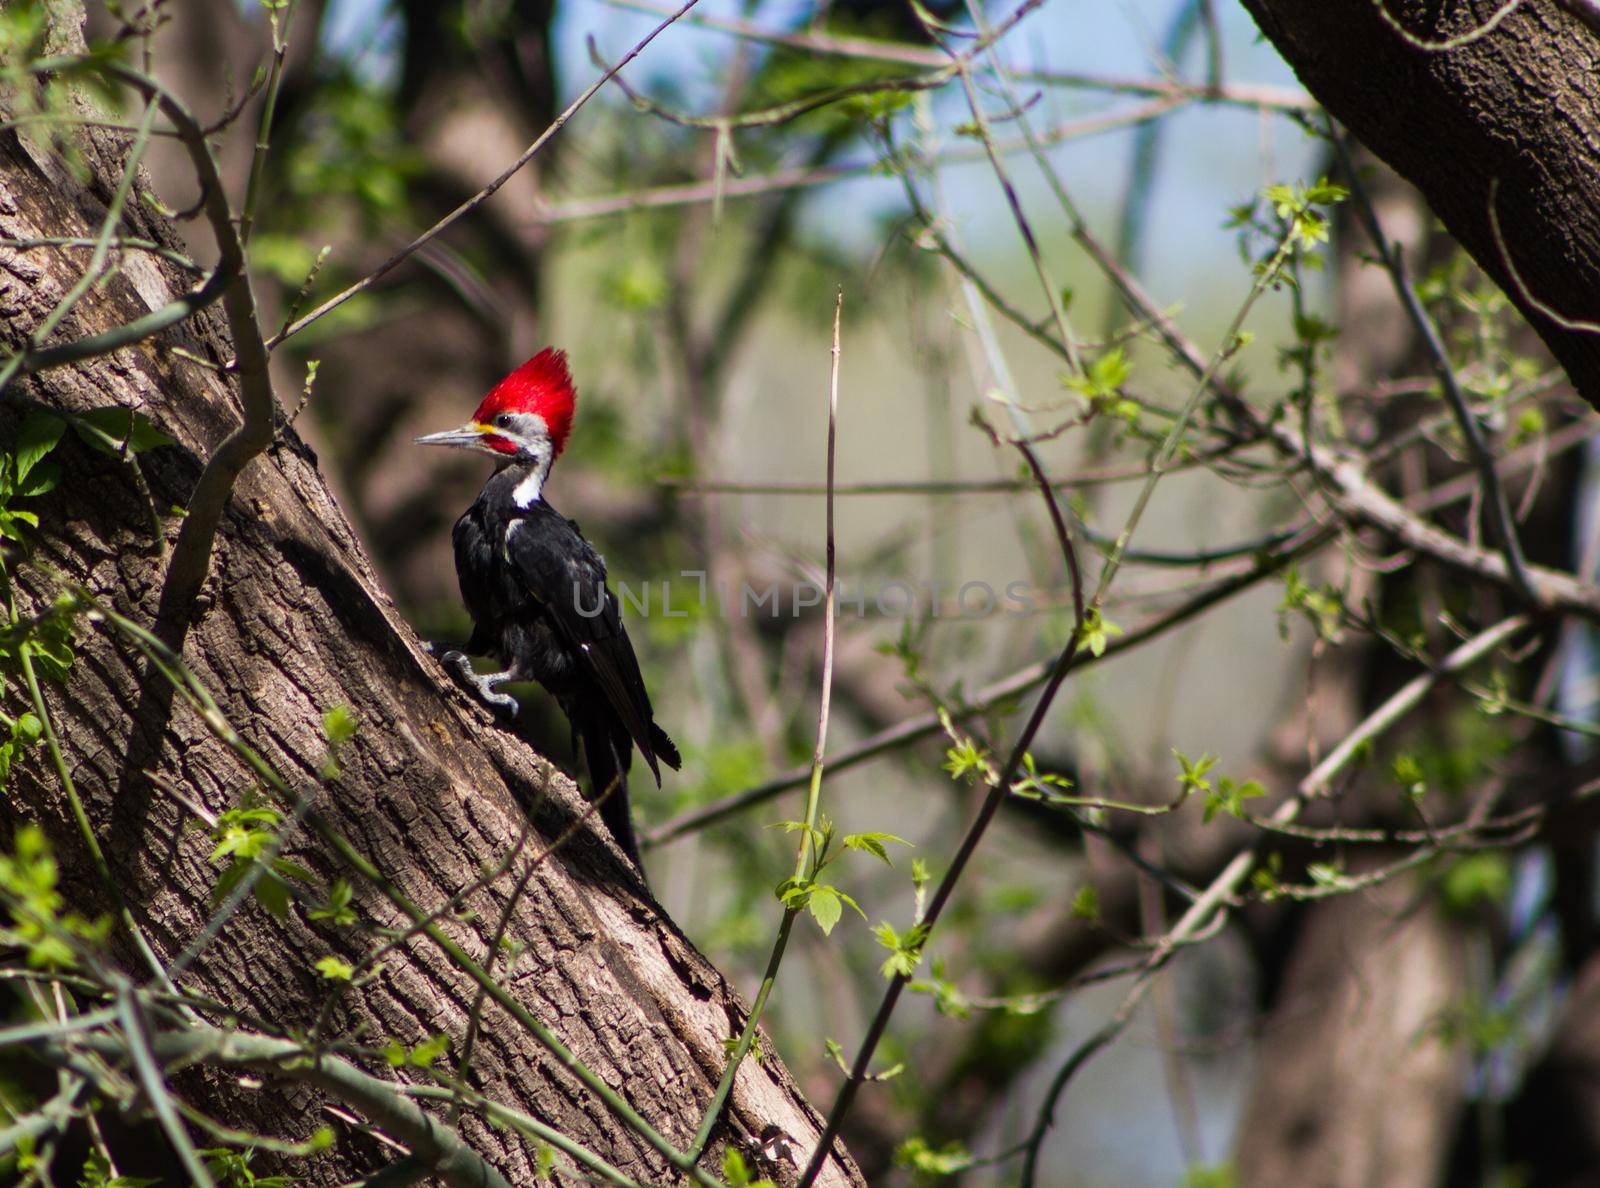 black woodpecker in the branches of the tree in its natural habitat in Cordoba Argentina